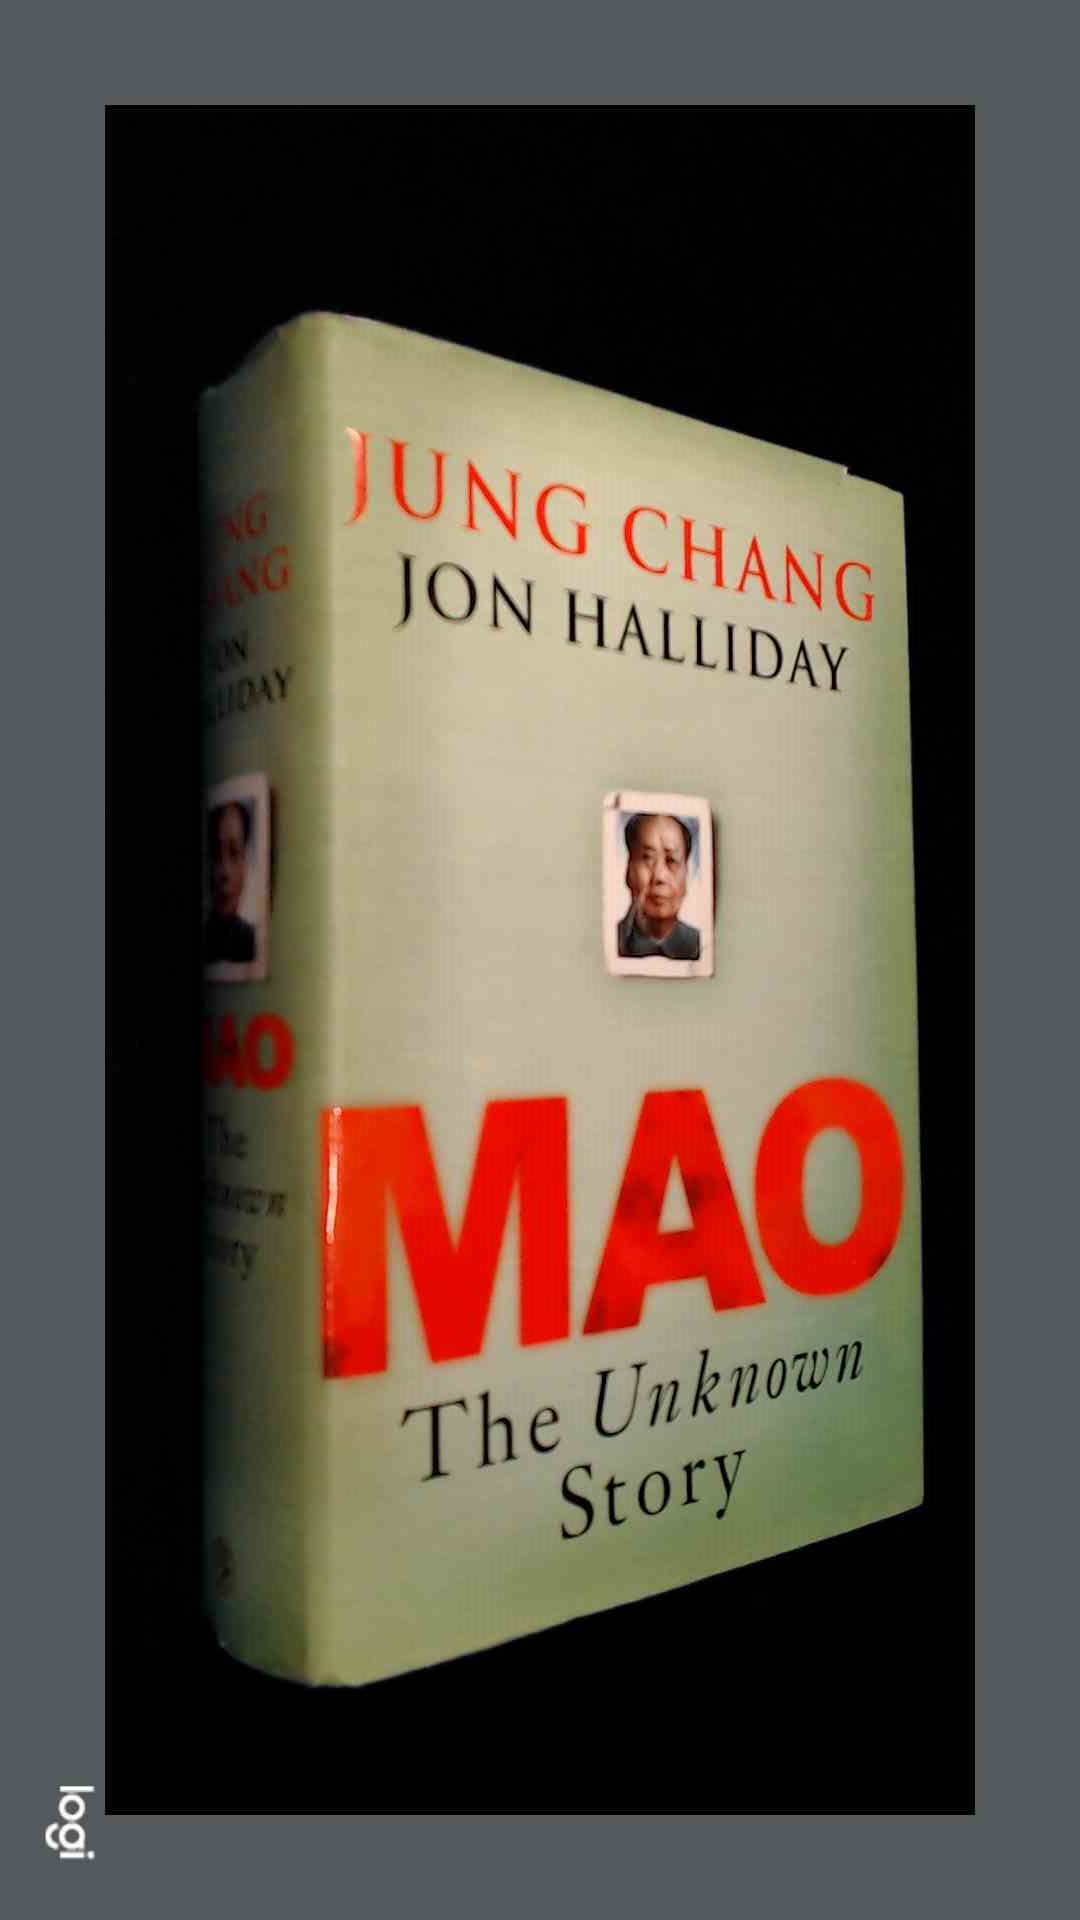 CHANG, JUNG - JON HALLIDAY - Mao - The unknown story